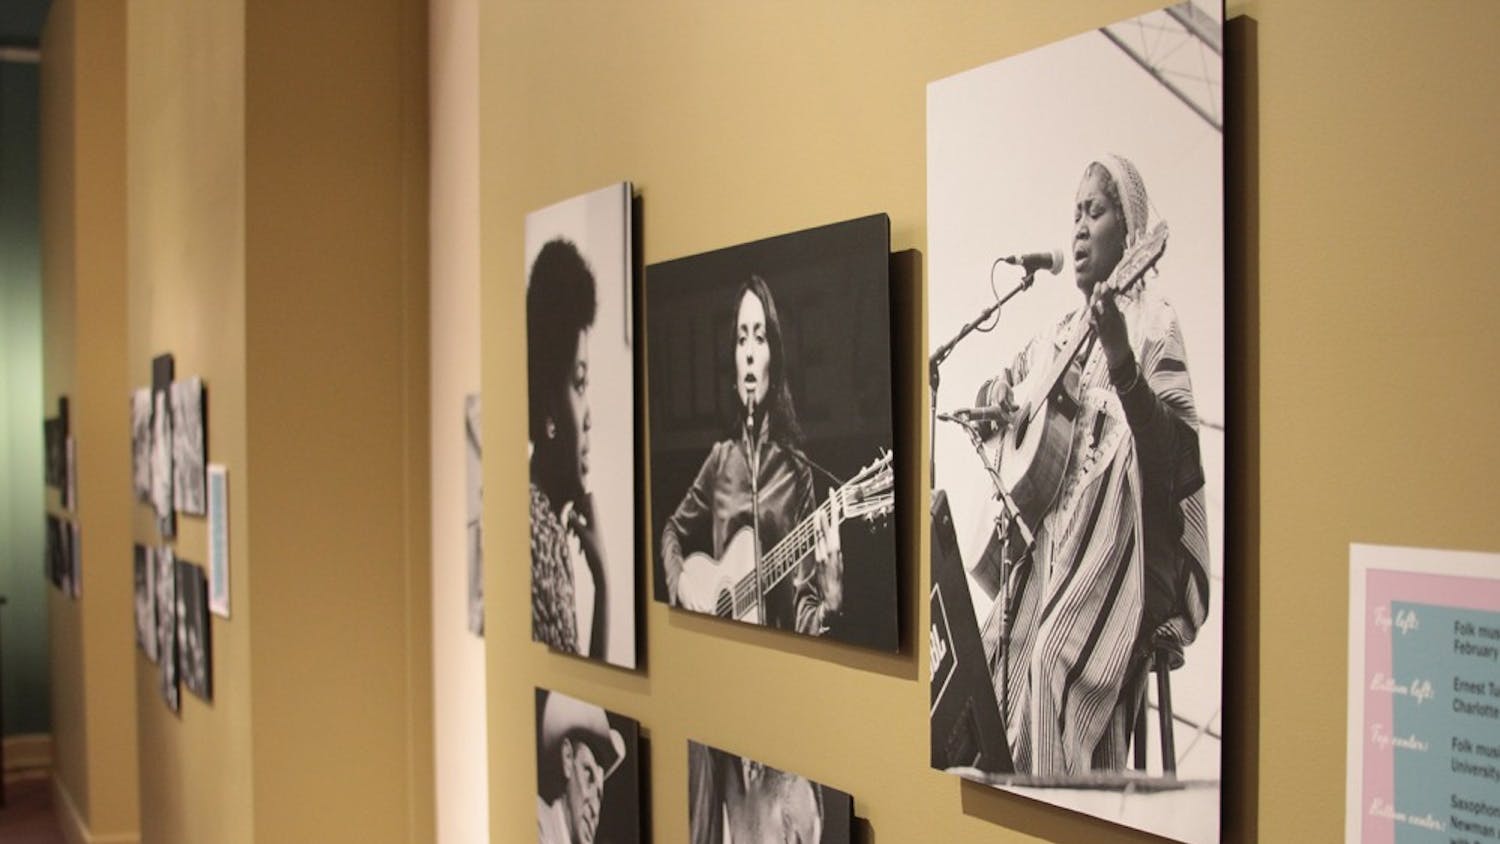 Wilson Library has a special collection entitled “Sounds Still.” The exhibition features photographs of music figures such as Joan Baez, Louis Armstrong and Elvis Presley.